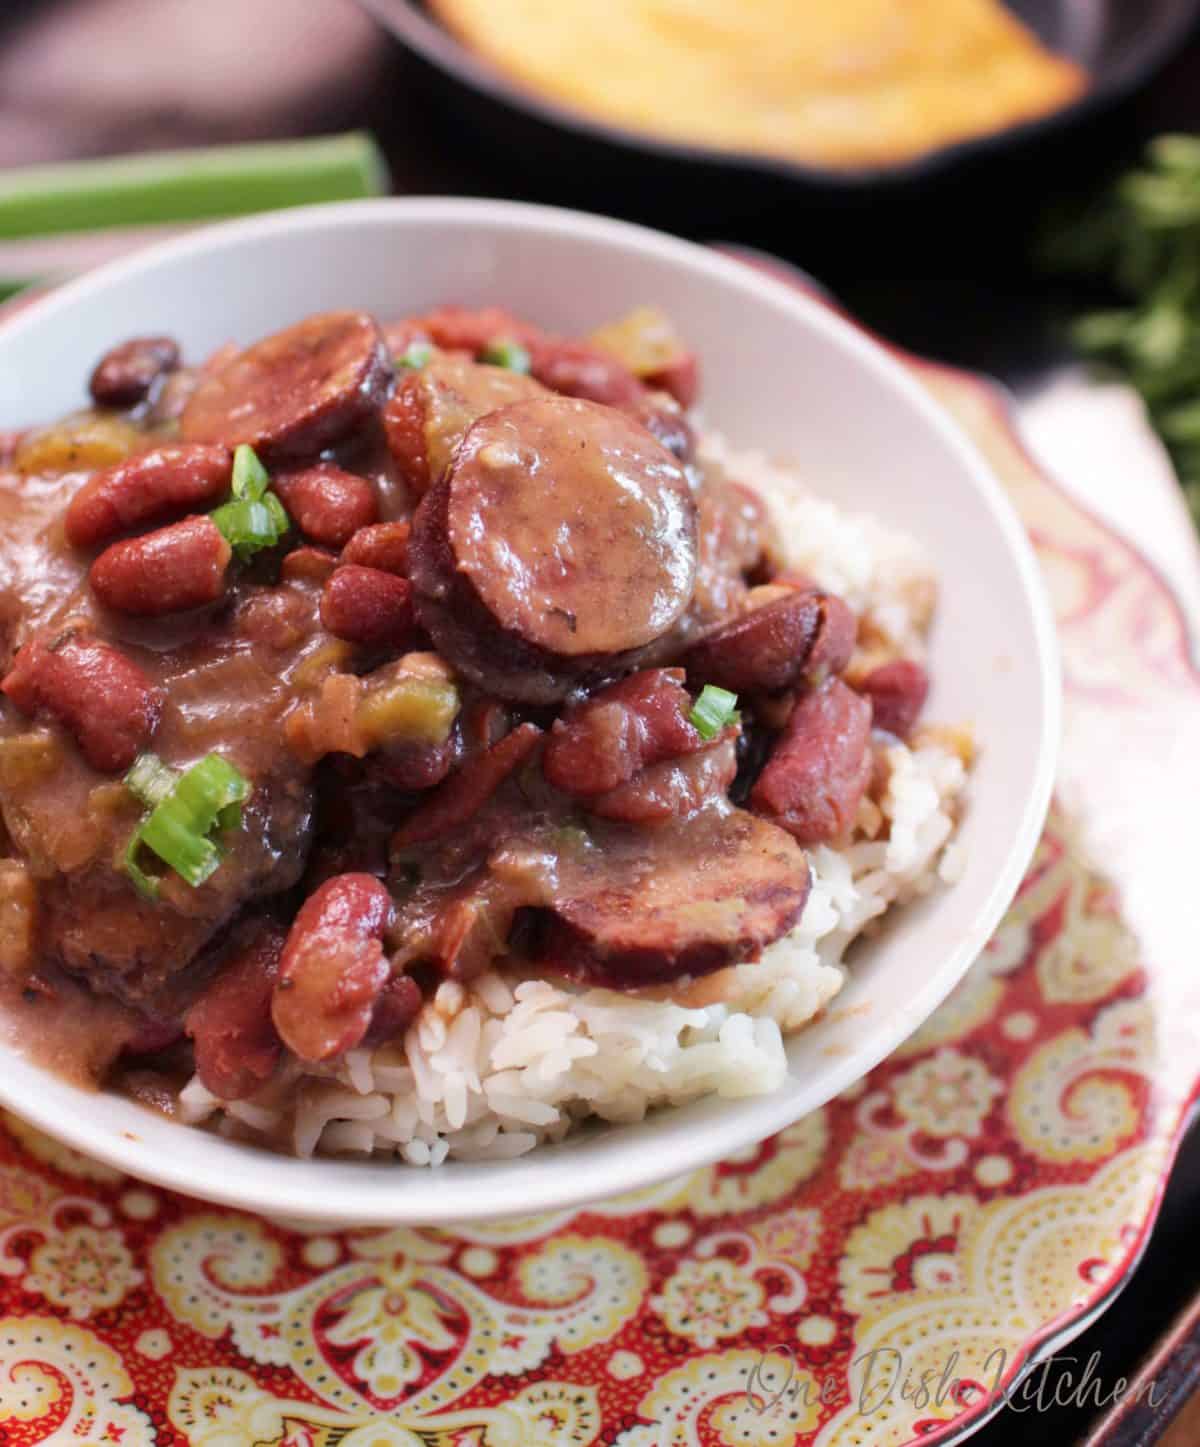 A close up of a bowl of red beans and white rice with sausage.